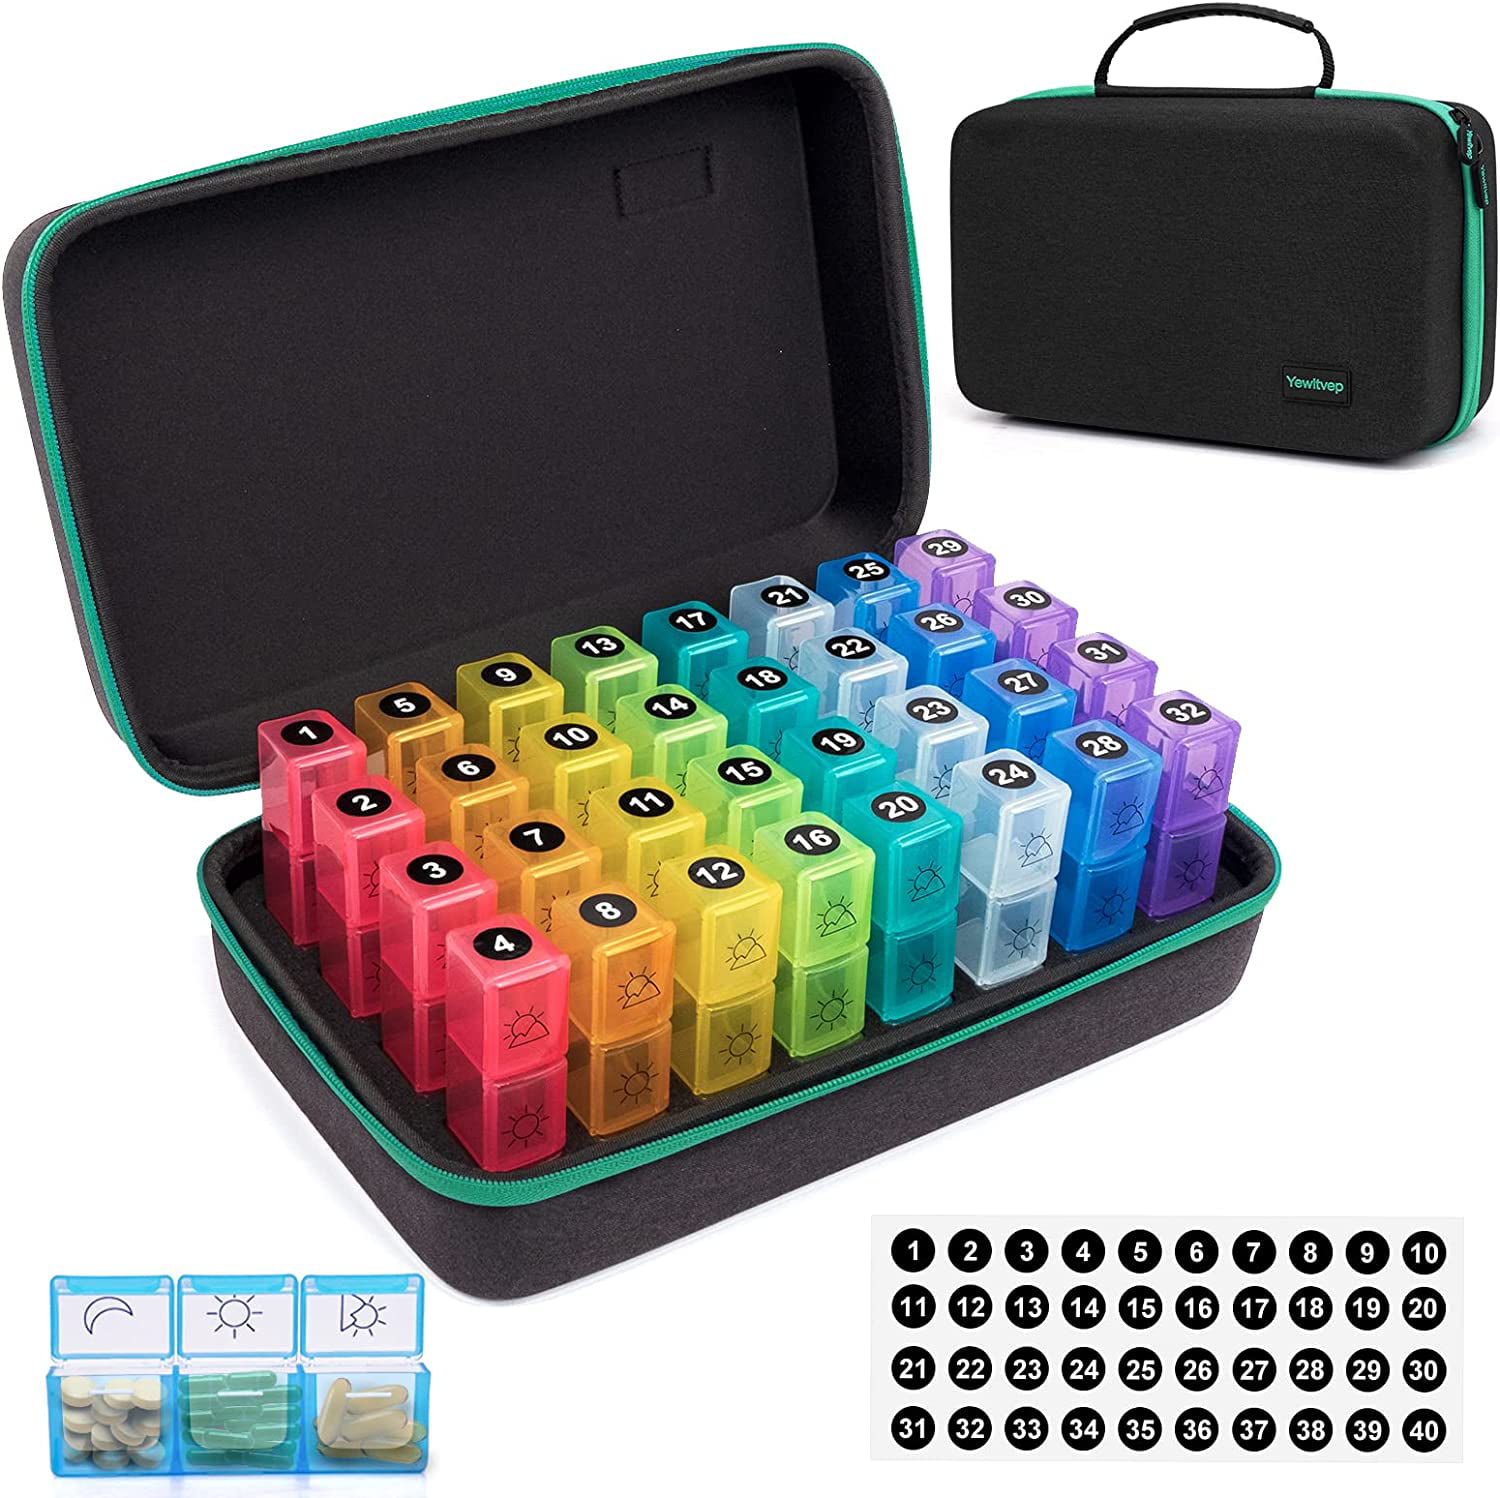 XL Monthly Pill Planner with Individual Weekly Organizers and Storage – Pill  Thing